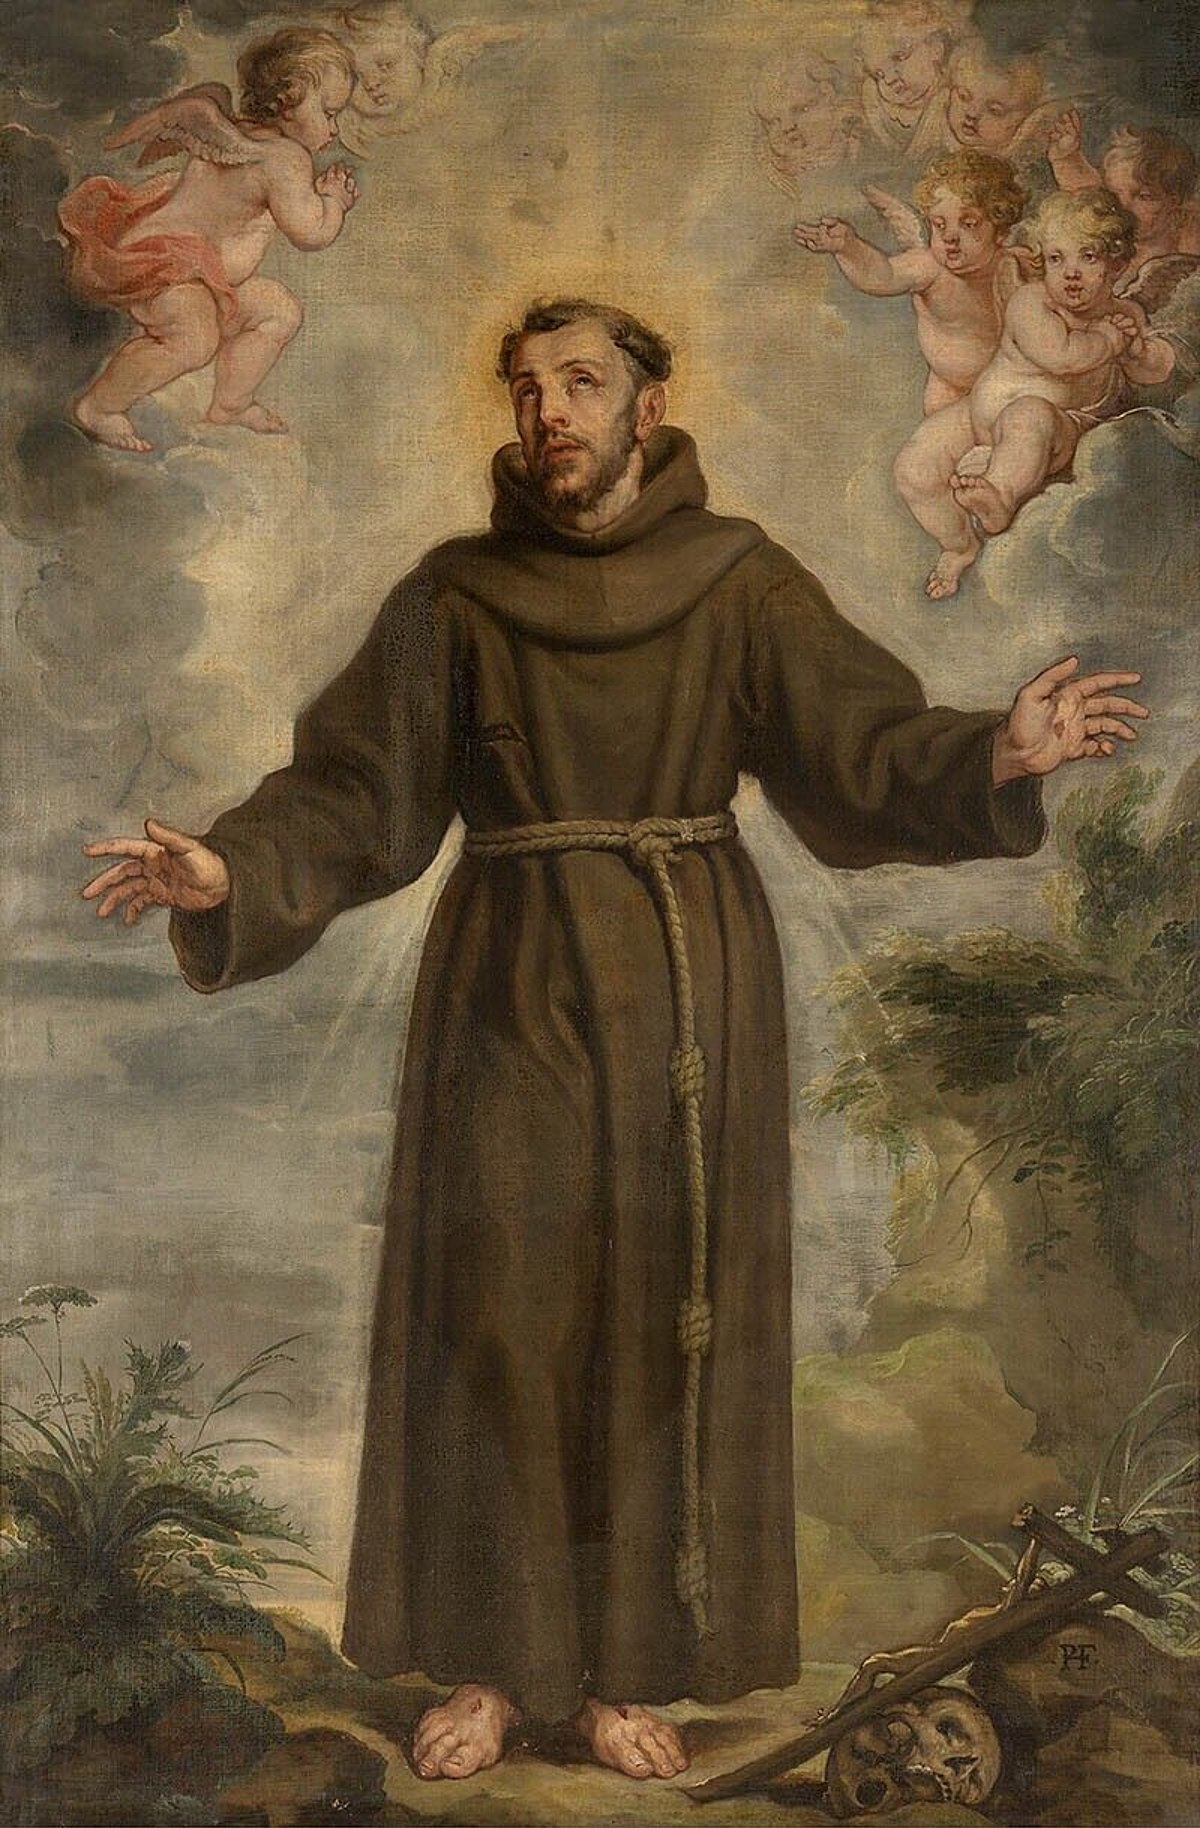 Saint Francis the Ultimate Influencer